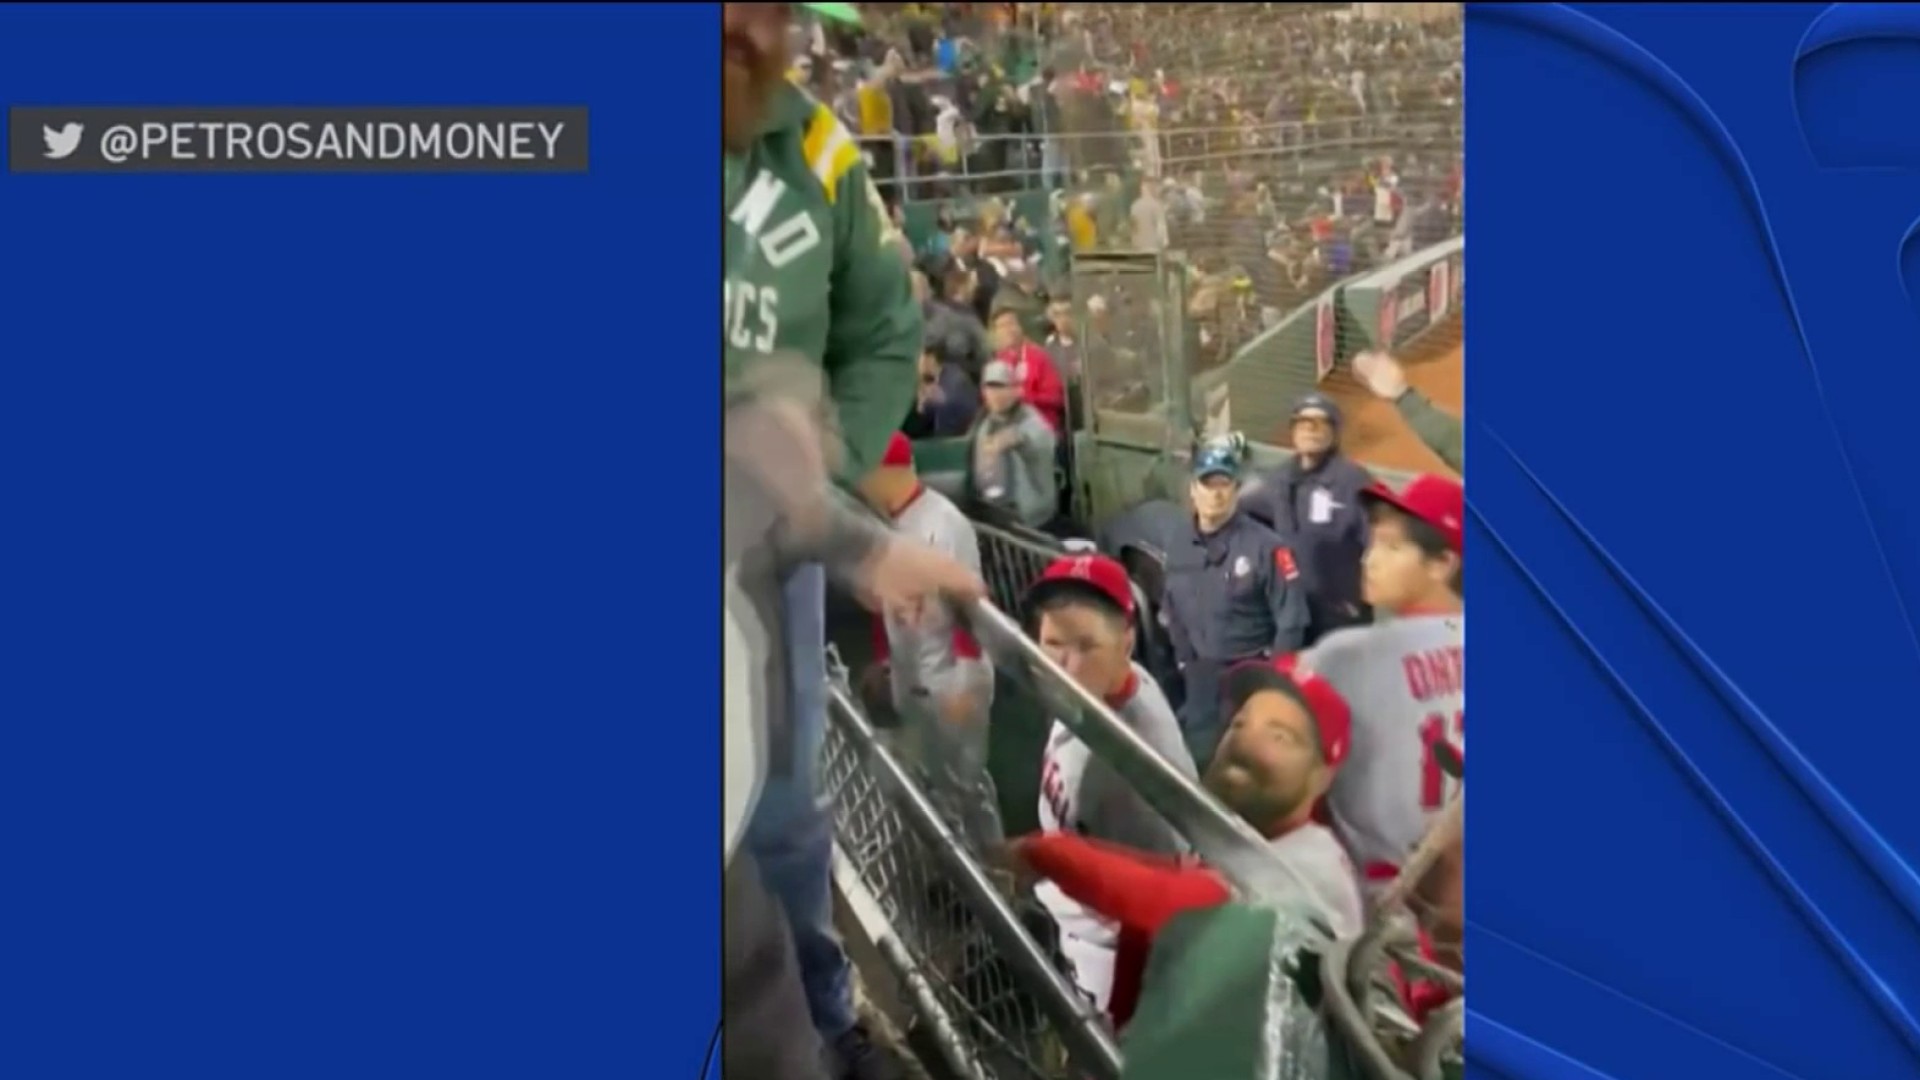 Anthony Rendon Fan Interaction Video in Oakland Looked Into by